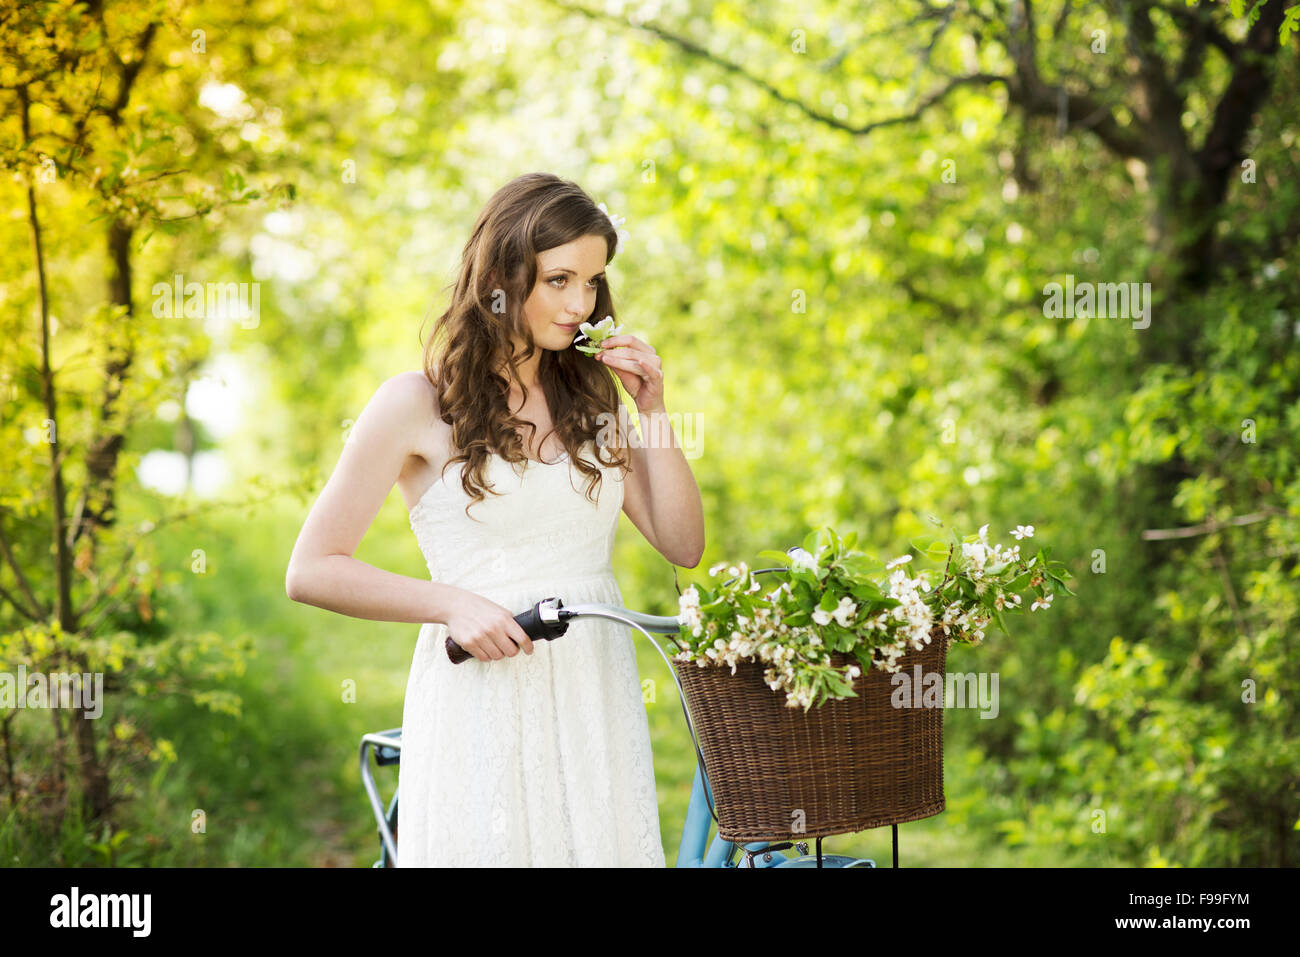 Pretty young woman with retro bike in green park Stock Photo